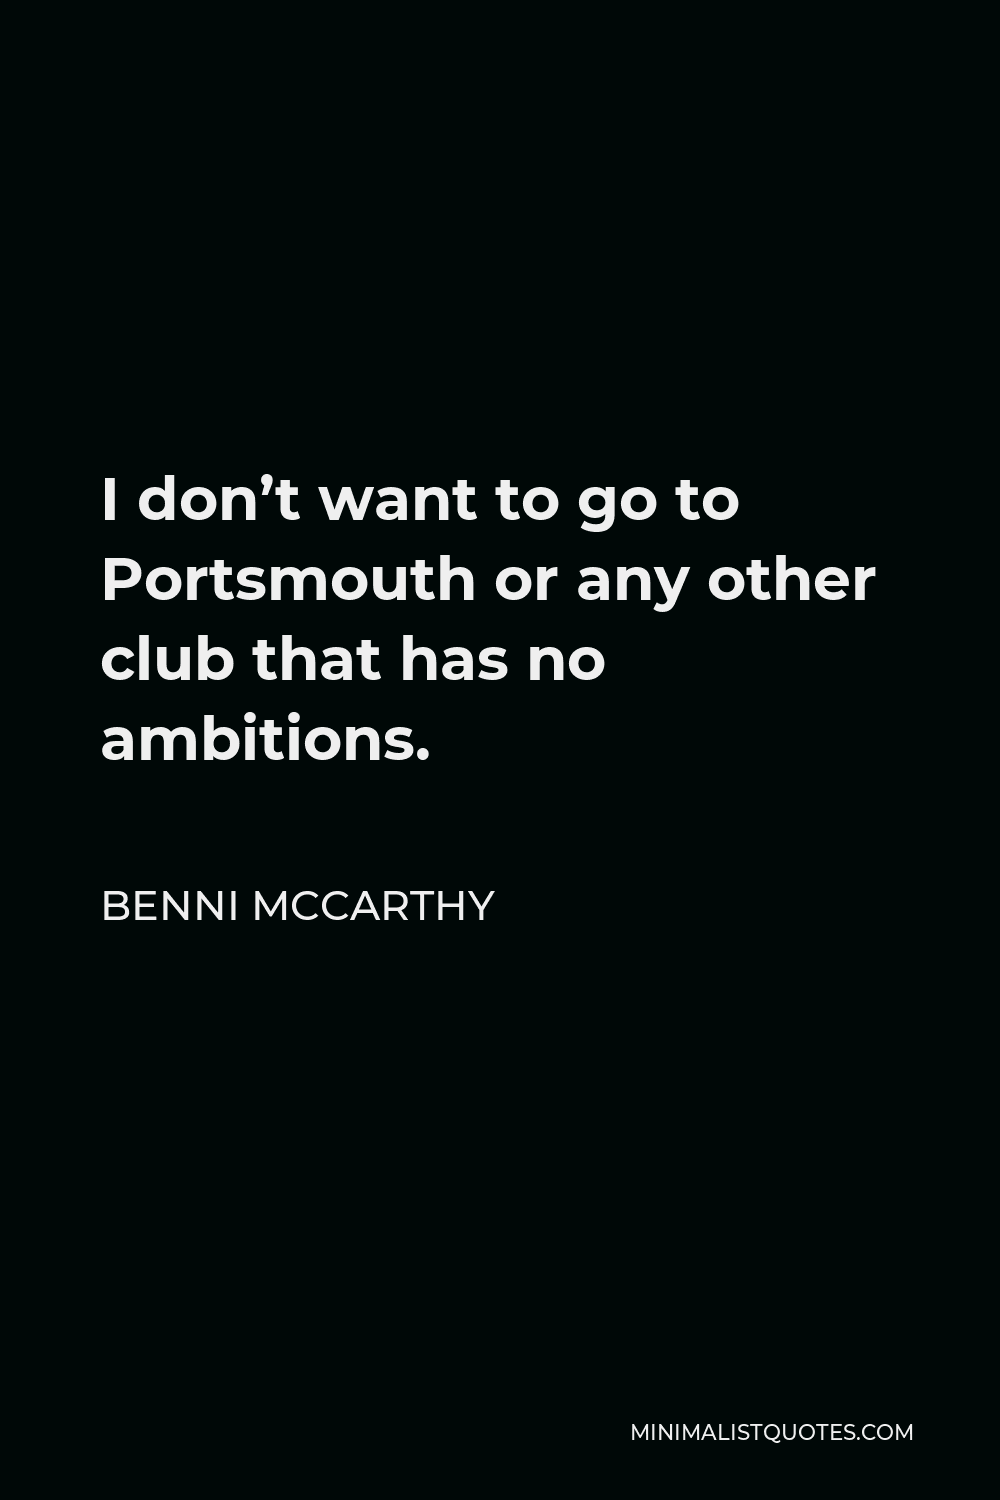 Benni McCarthy Quote - I don’t want to go to Portsmouth or any other club that has no ambitions.